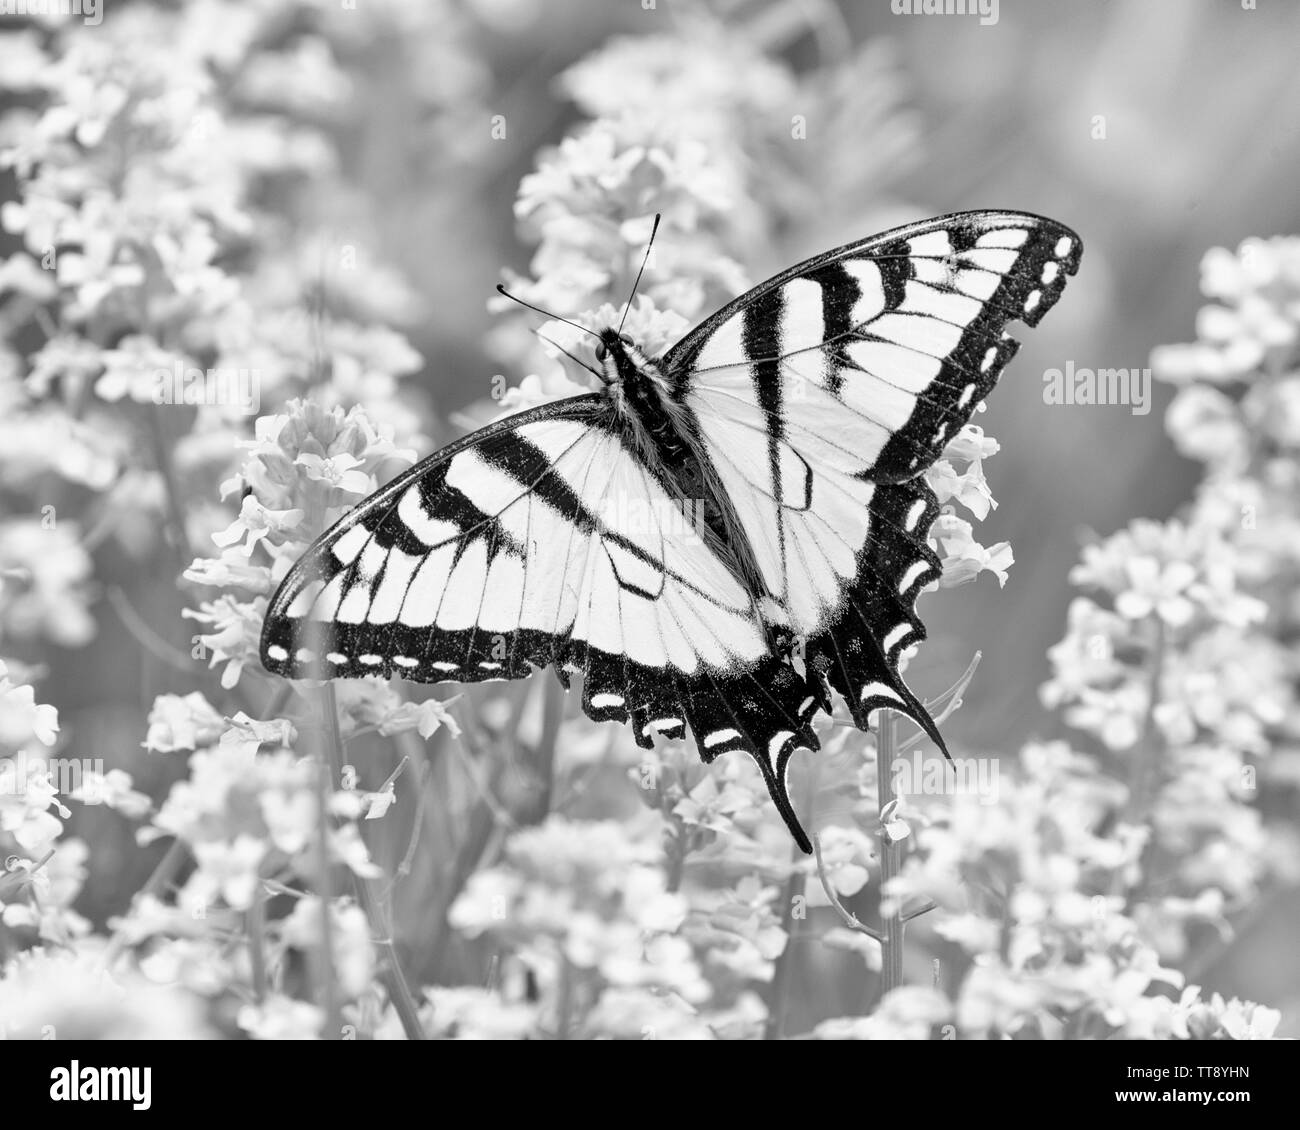 Horizontal black and white shot looking down on a butterfly.  Looks like he’s flying over some little flowers. Stock Photo